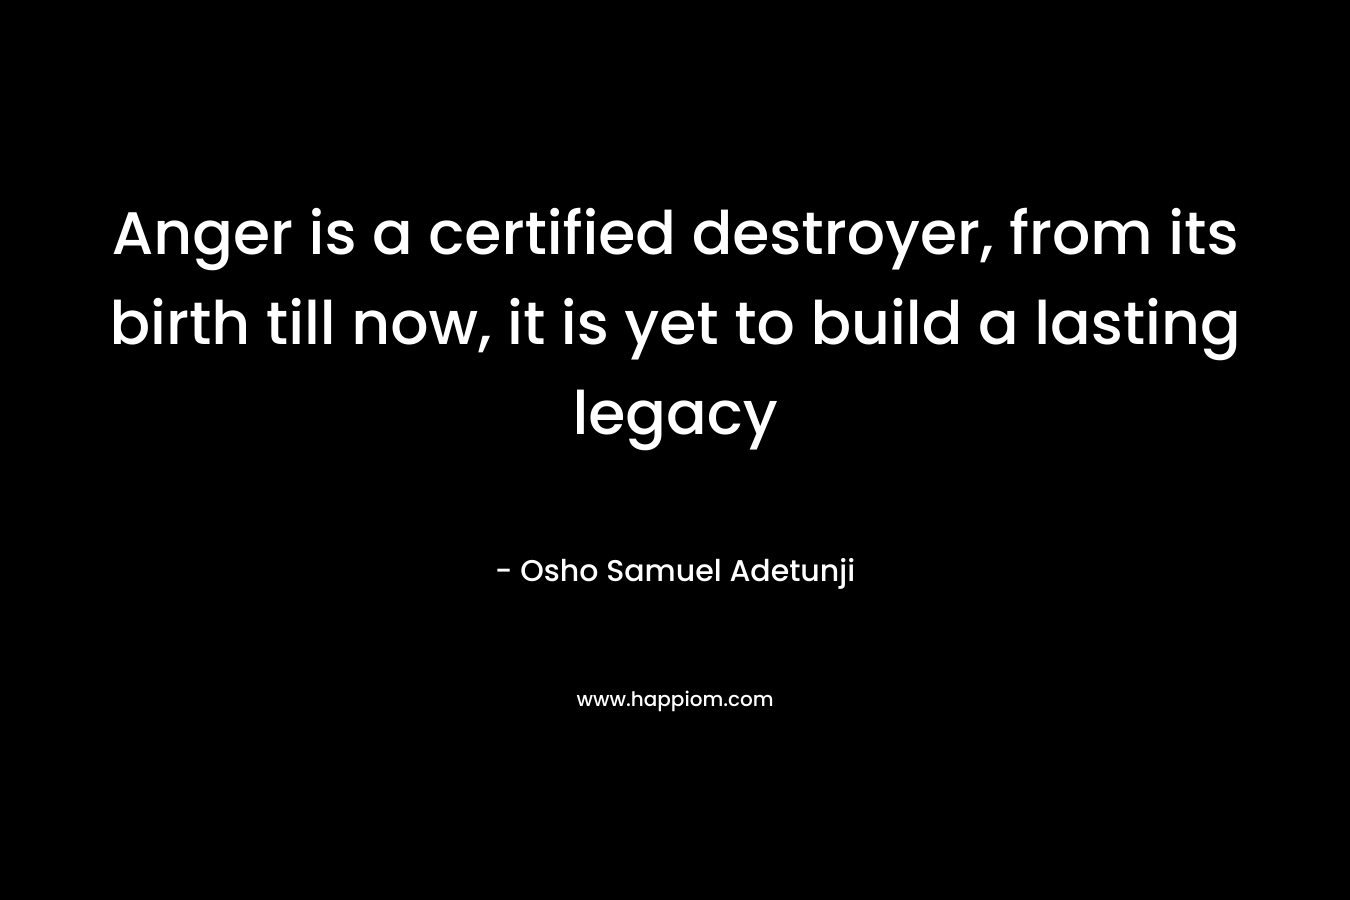 Anger is a certified destroyer, from its birth till now, it is yet to build a lasting legacy